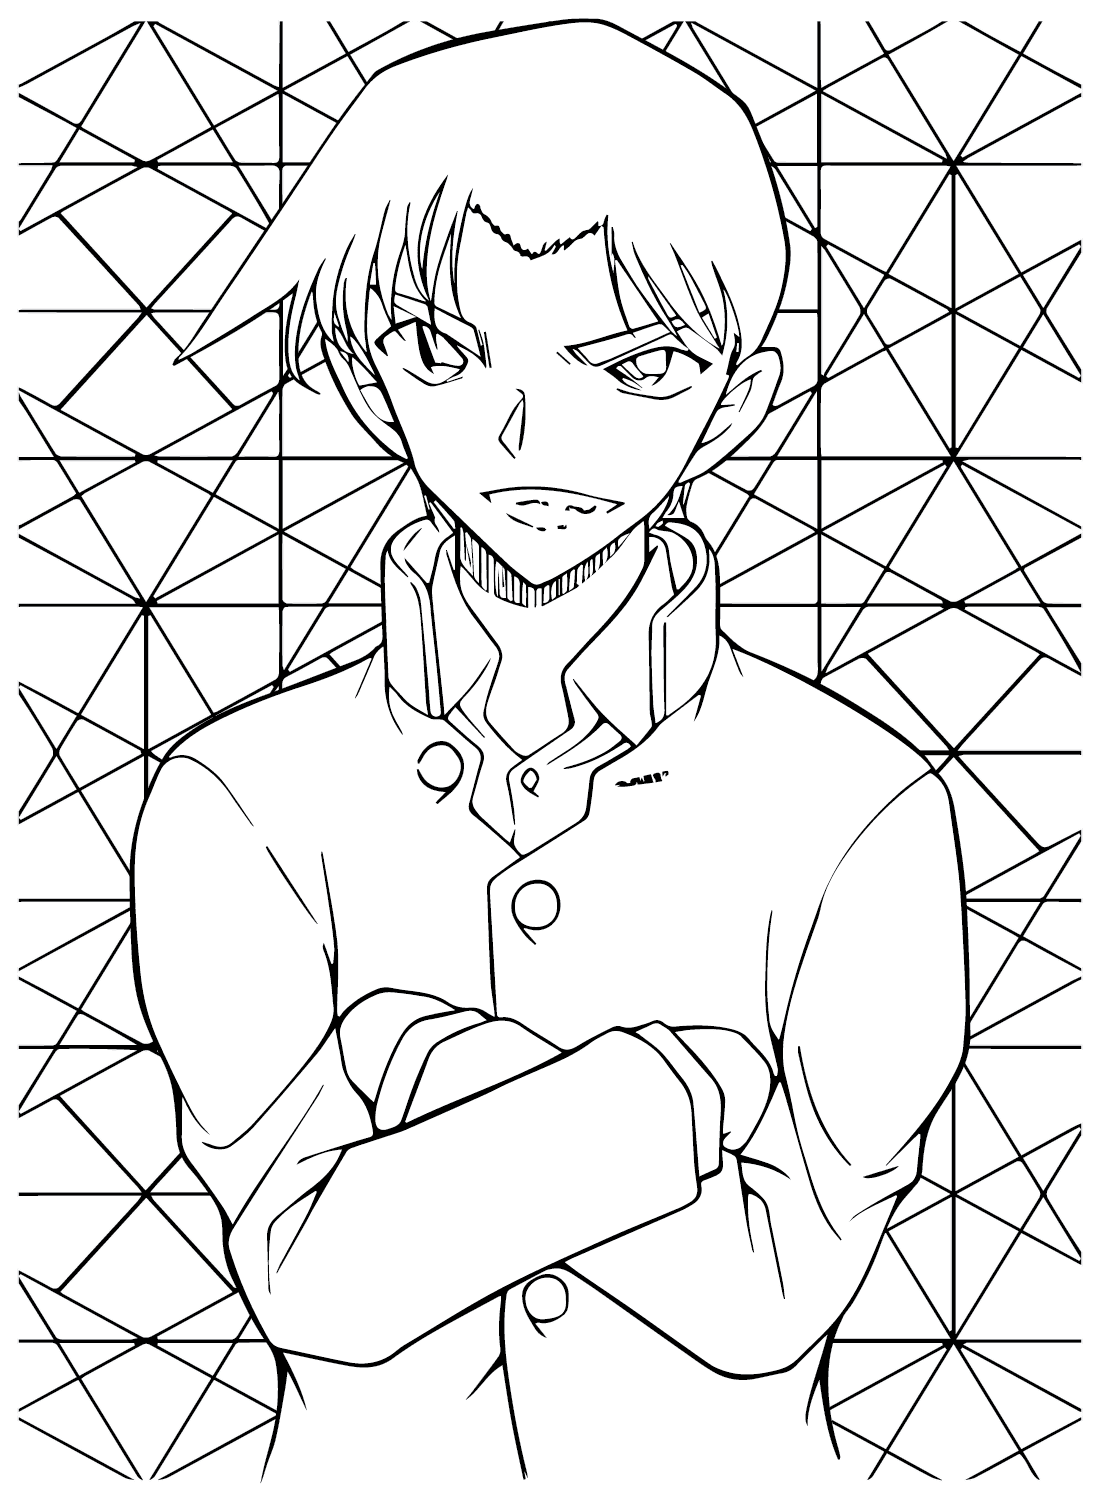 Hattori Heiji Coloring Page PNG from Hattori Heiji